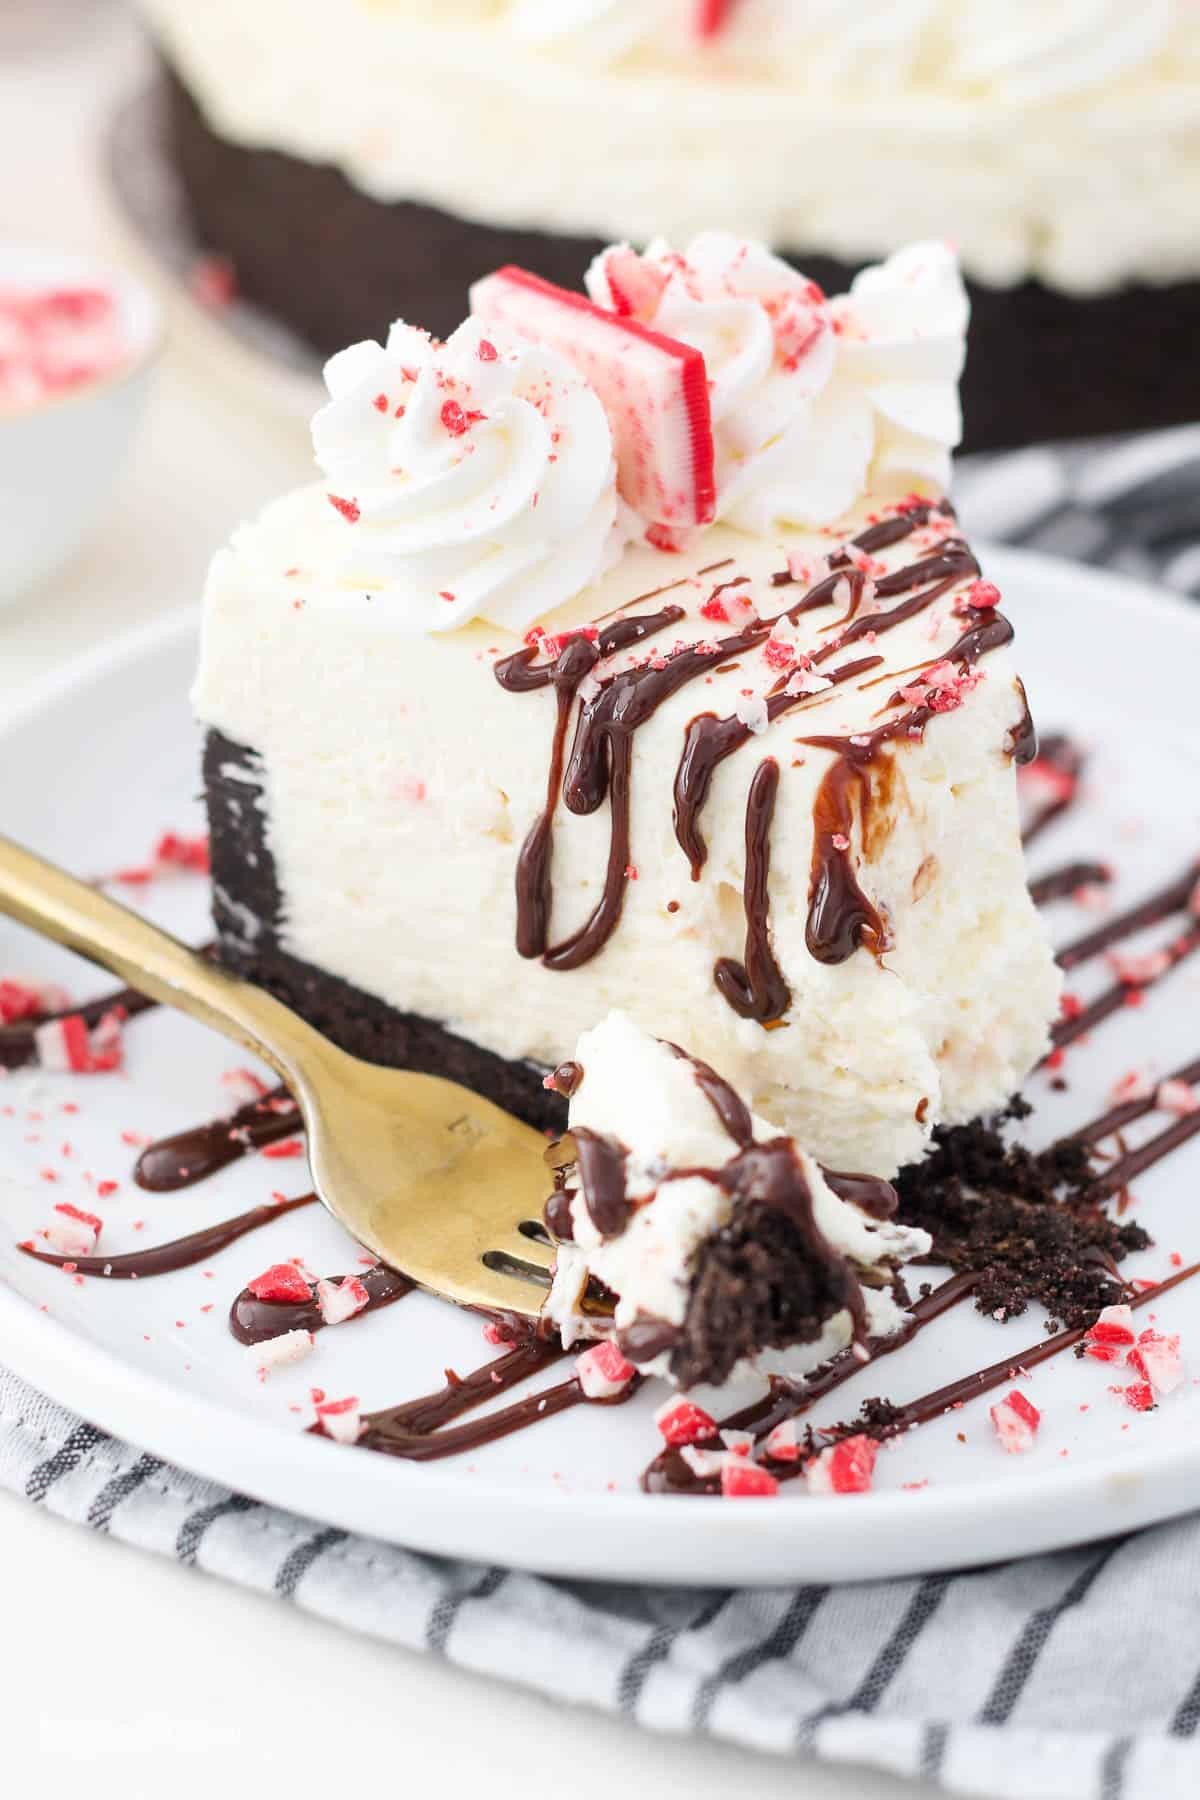 A big slice of peppermint cheesecake with a few bites taken out of it. The cheesecake is garnished with hot fudge and crushed peppermint